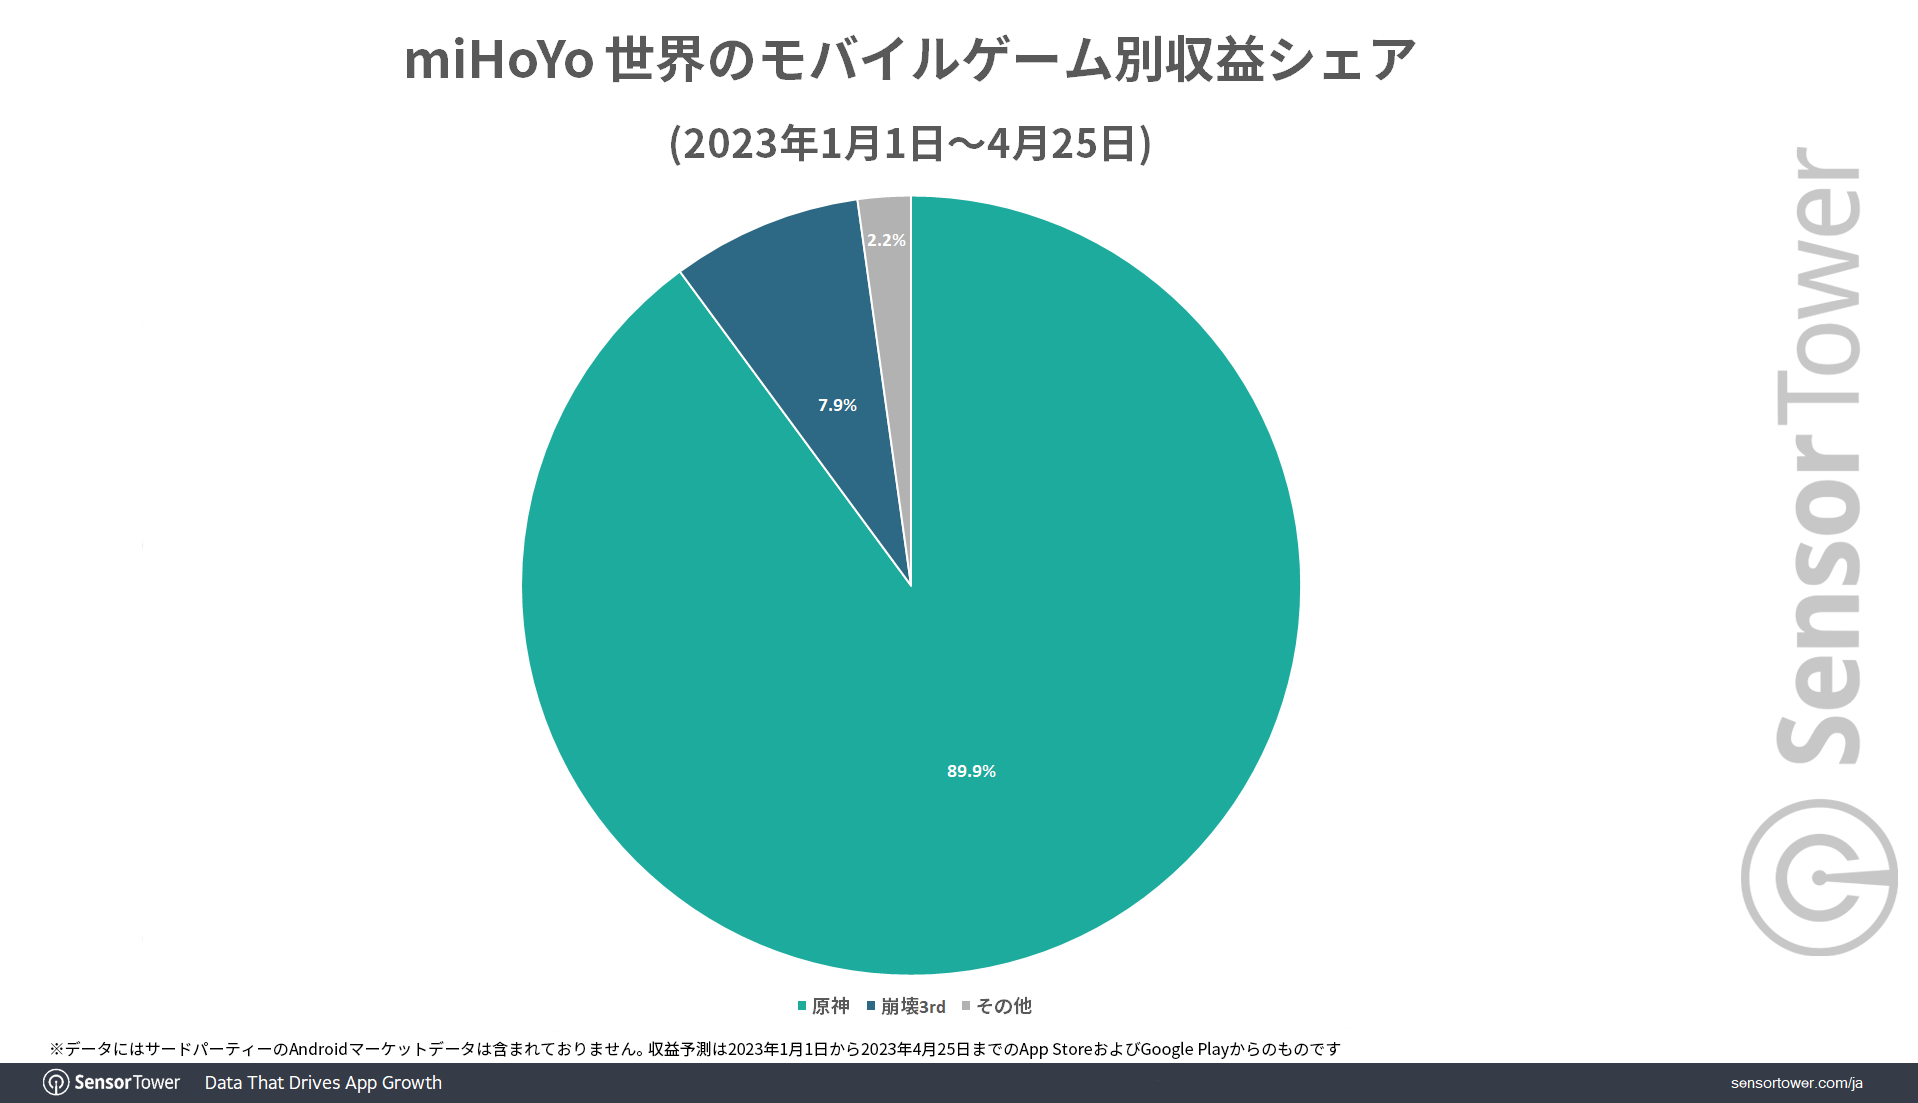 miHoYo-Revenue-Share-by-Game1